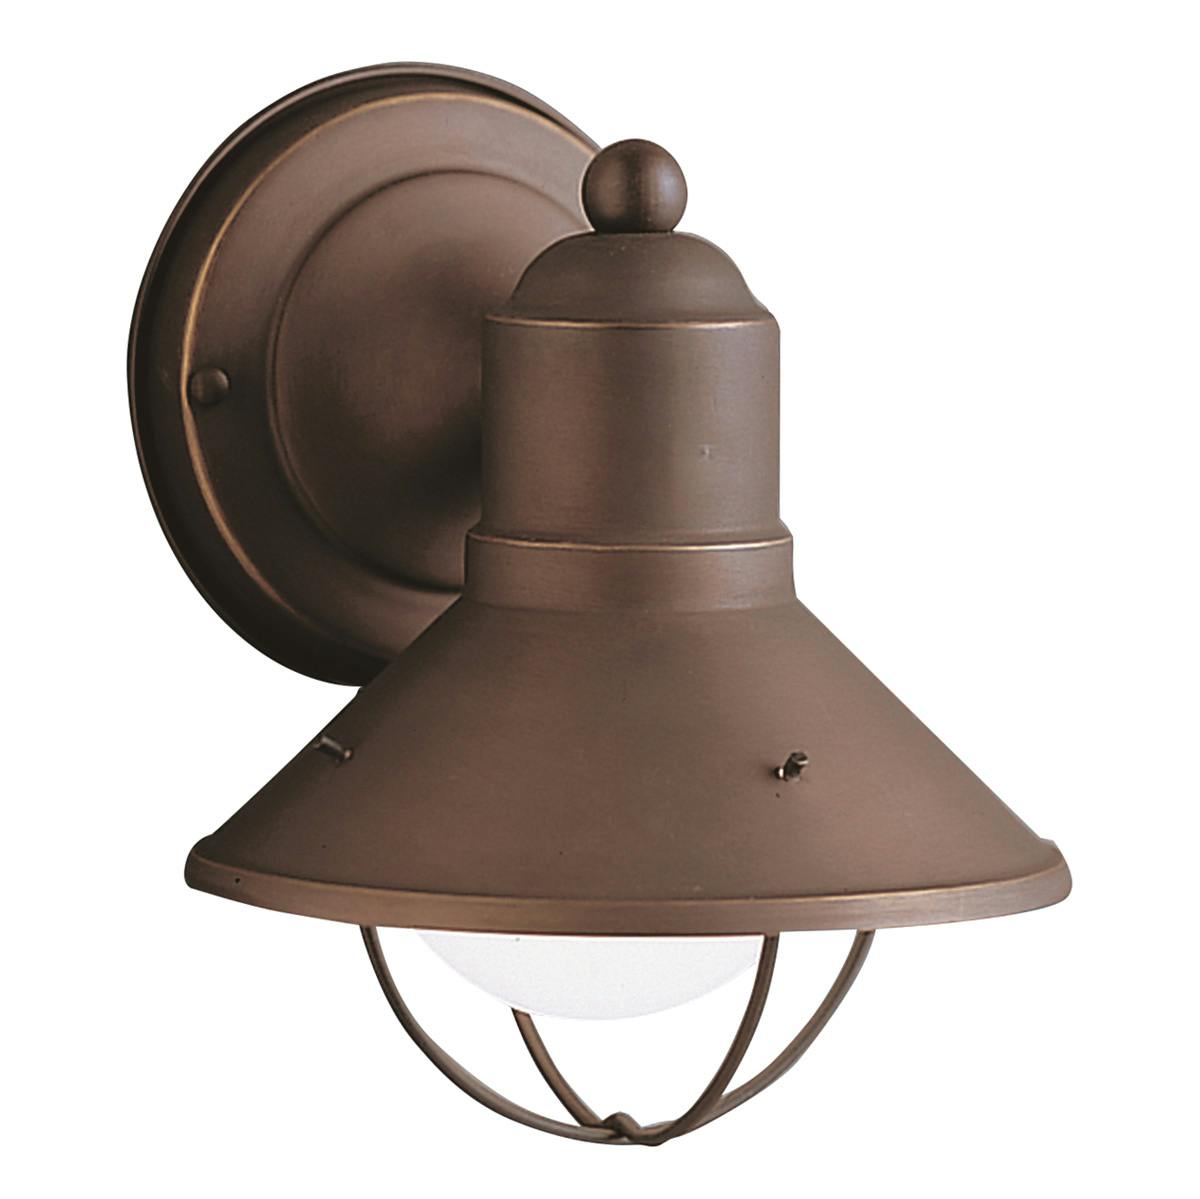 Product image for Seaside outdoor wall light 9021OZ